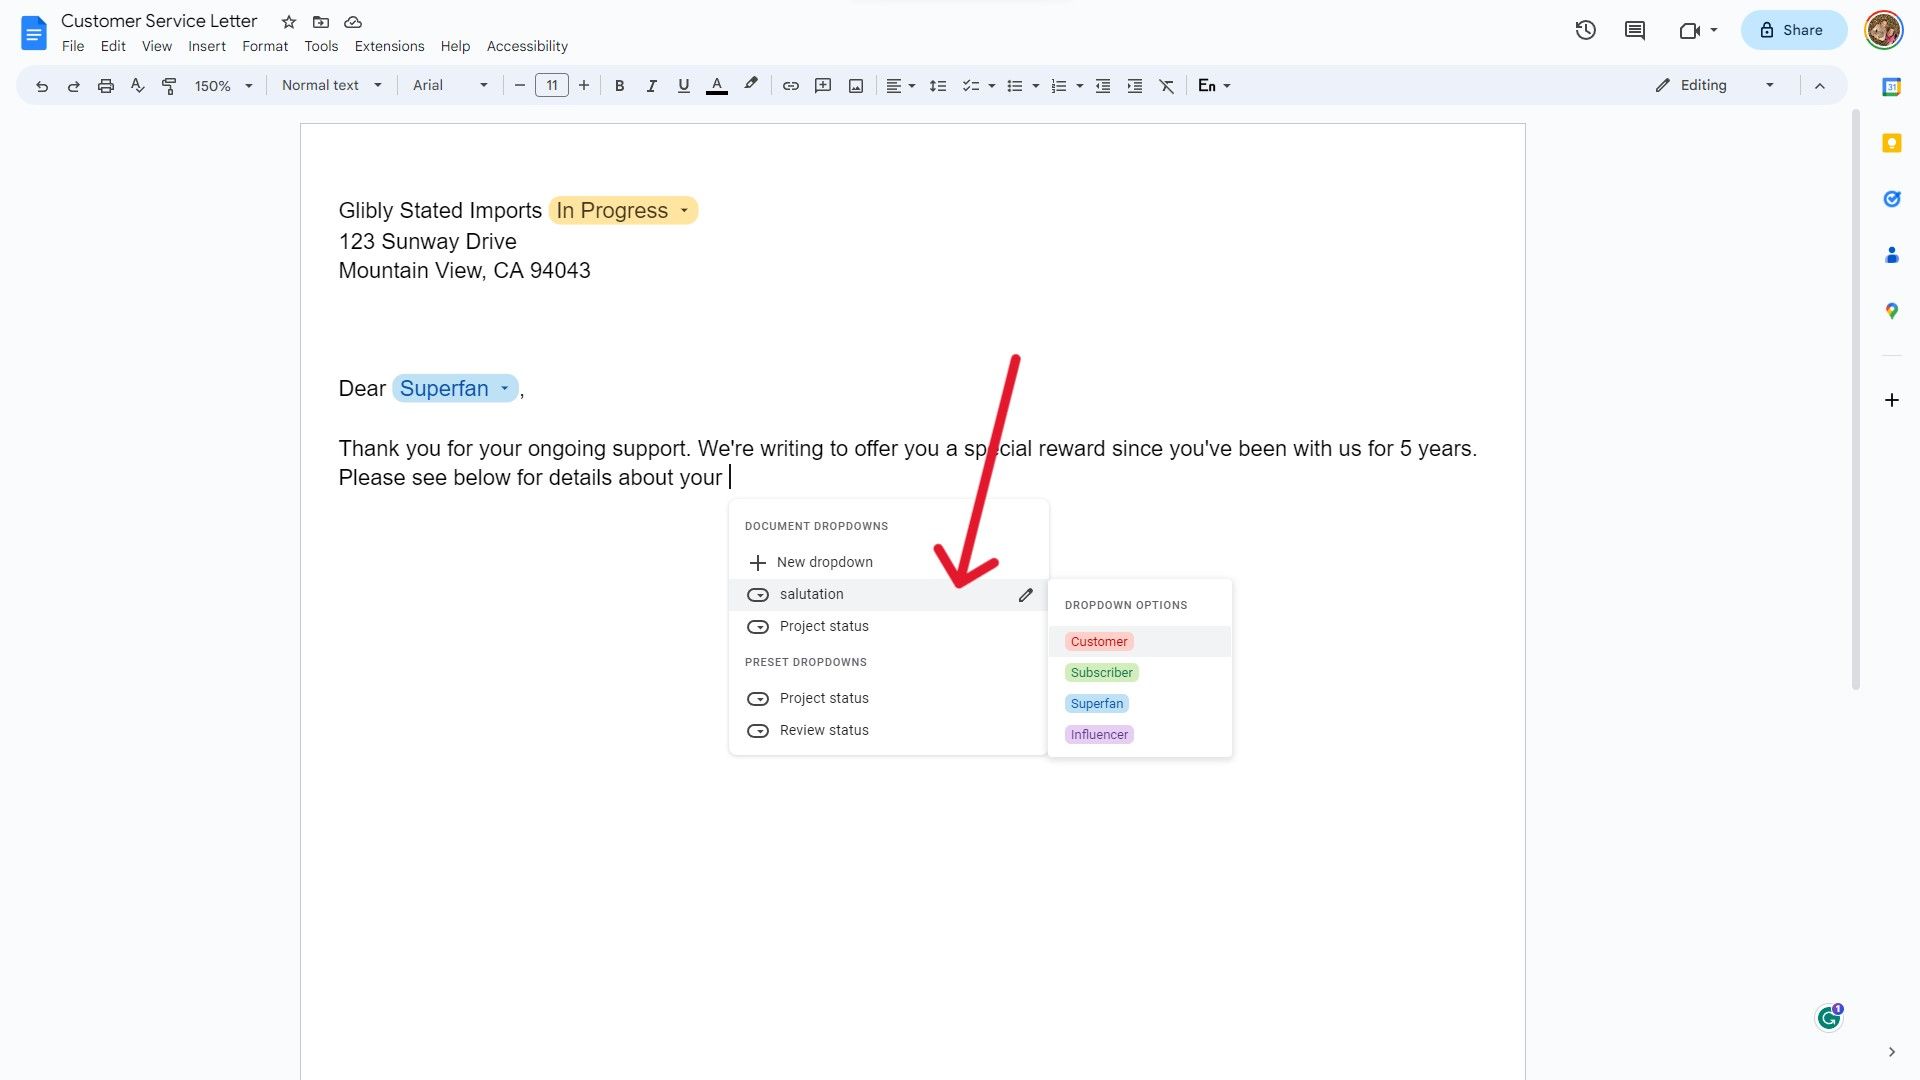 A screenshot of a Google Docs document showing dropdowns and hovering to see options.